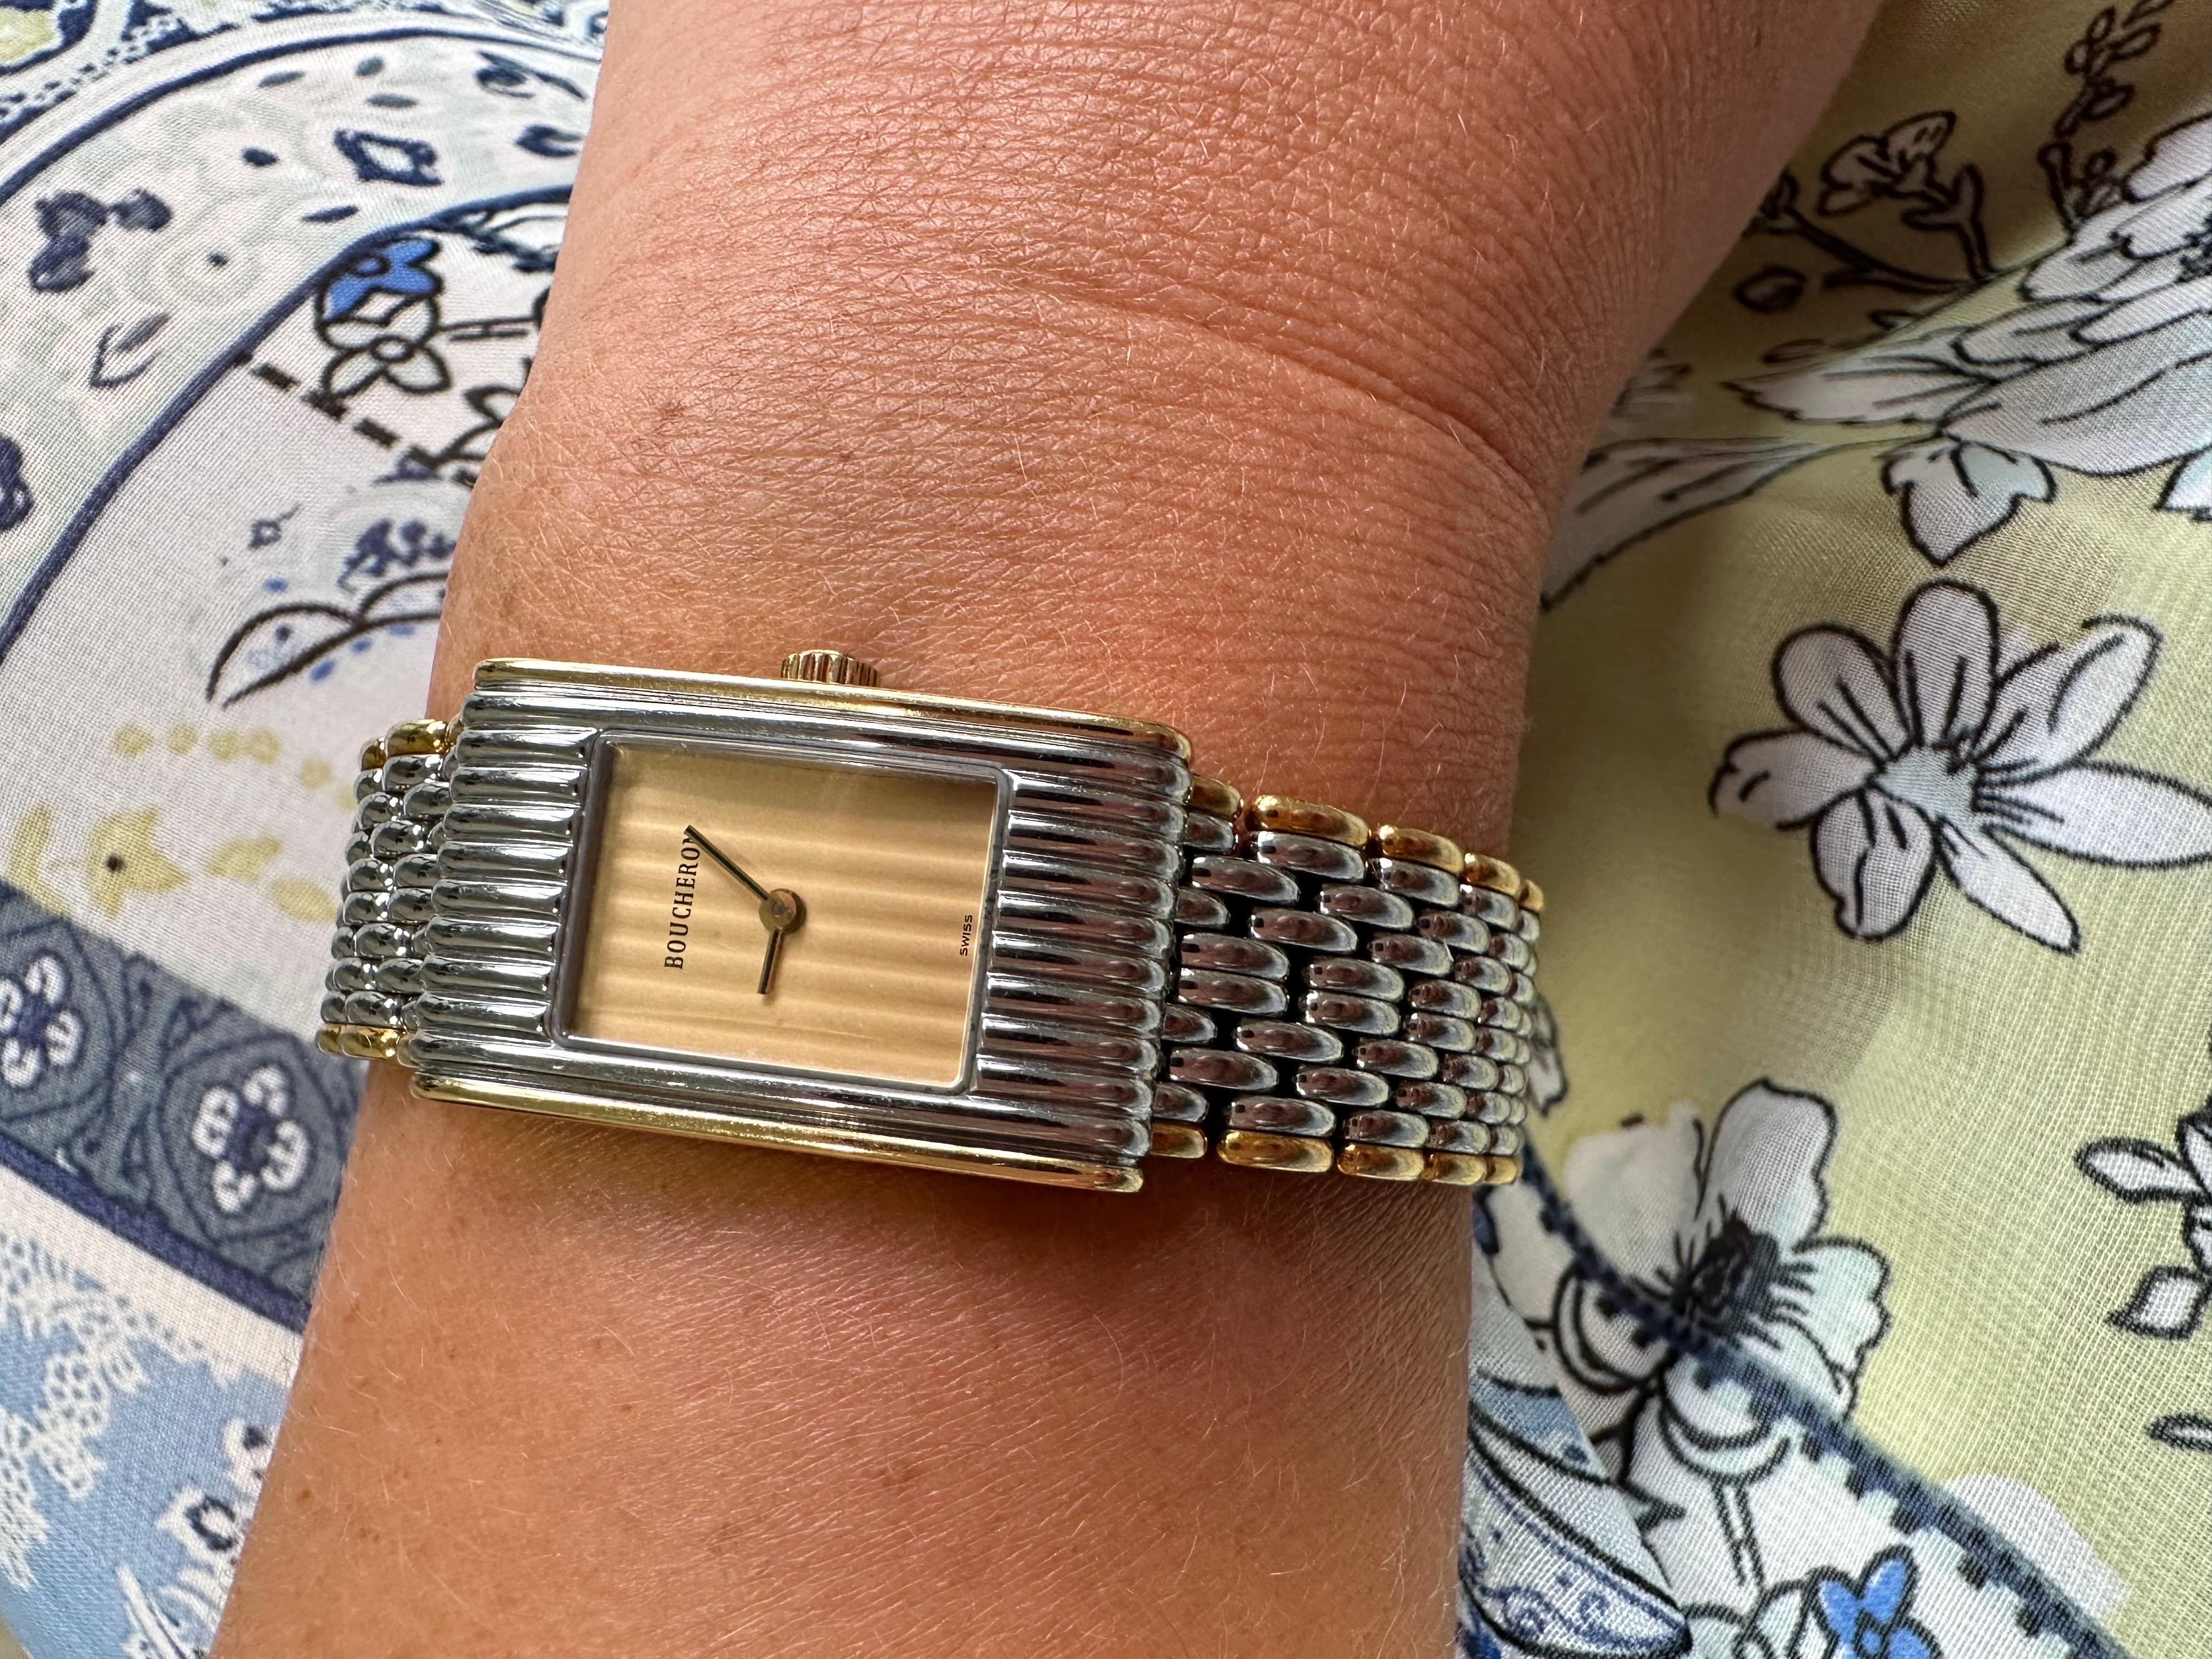 Boucheron watch ladies in amazing condition. Stainless steel and yellow gold, rare 2 bracelet design.
Item#: 500-00011AMTT

WHAT YOU GET AT STAMPAR JEWELERS:
Stampar Jewelers, located in the heart of Jupiter, Florida, is a custom jewelry store and